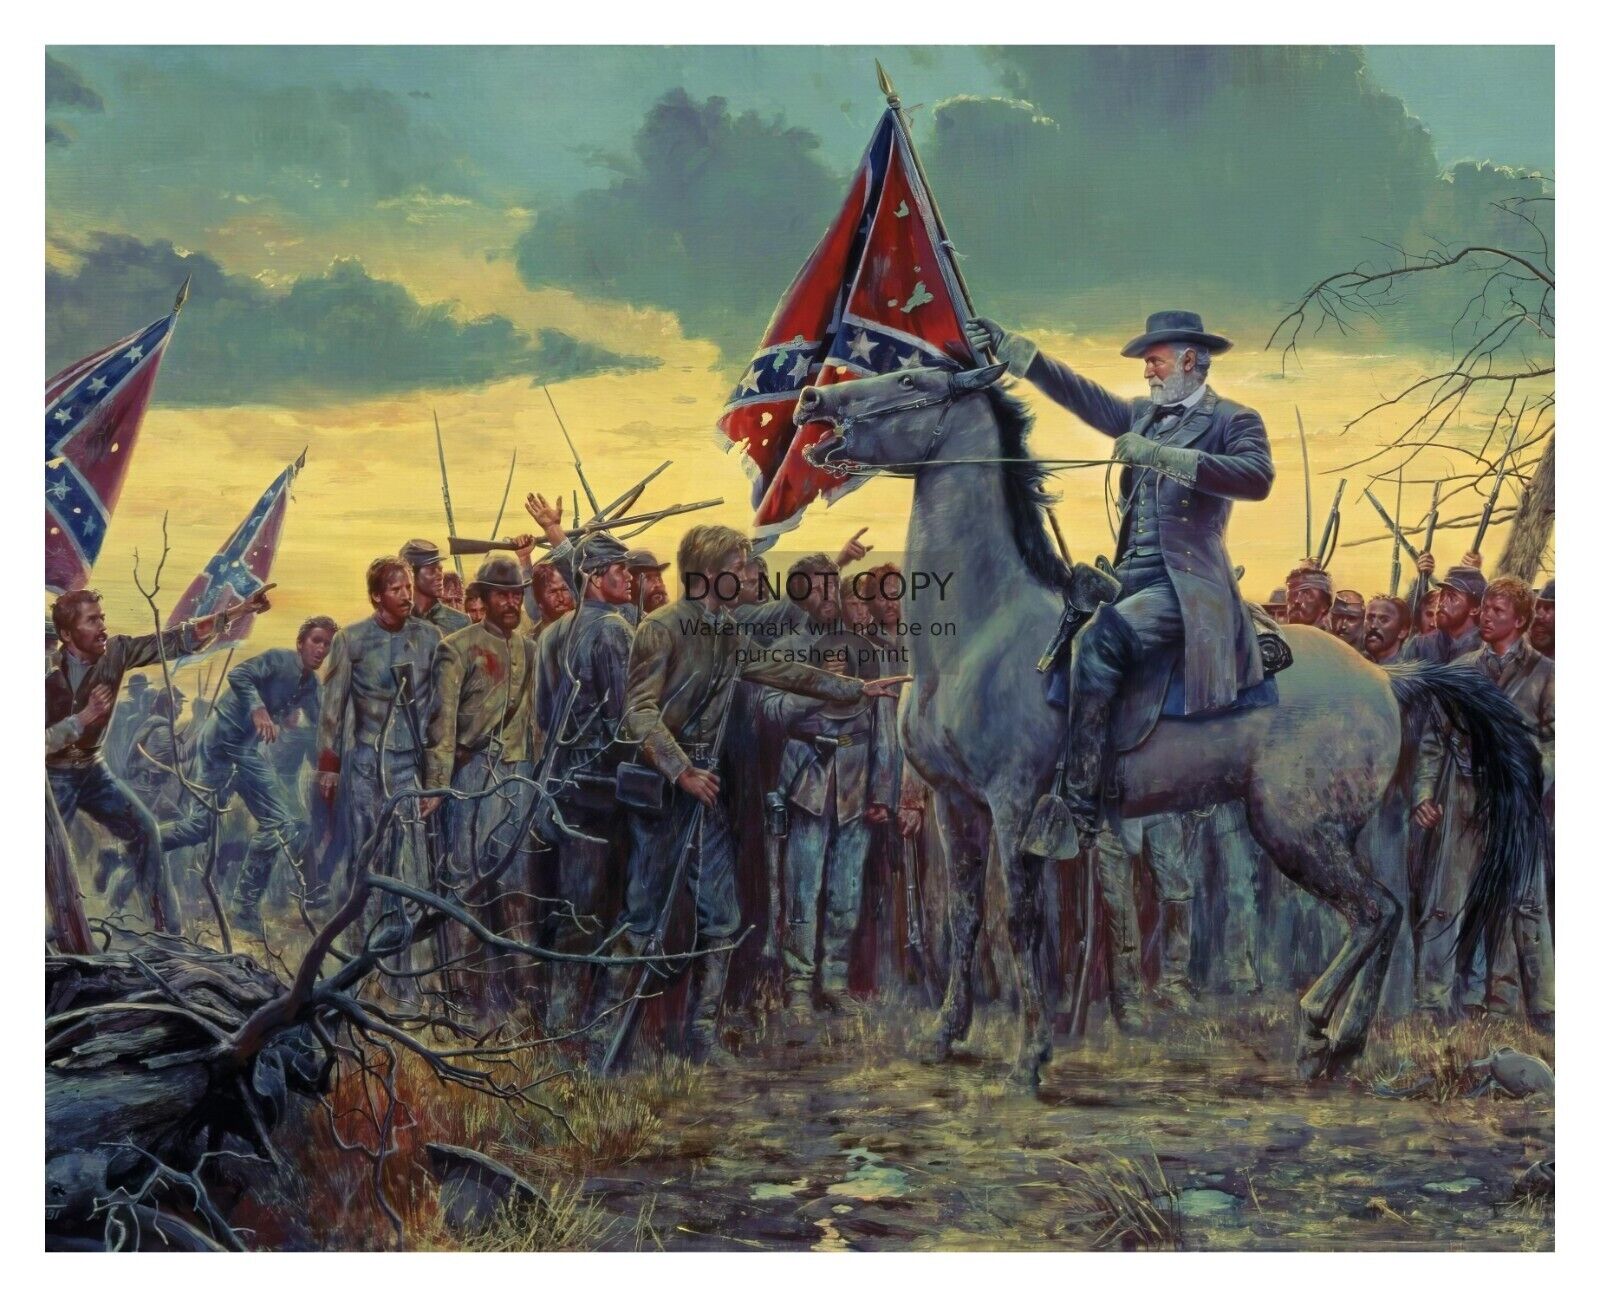 ROBERT E. LEE THE LAST CONFEDERATE RALLY PAINTING 8X10 PHOTO